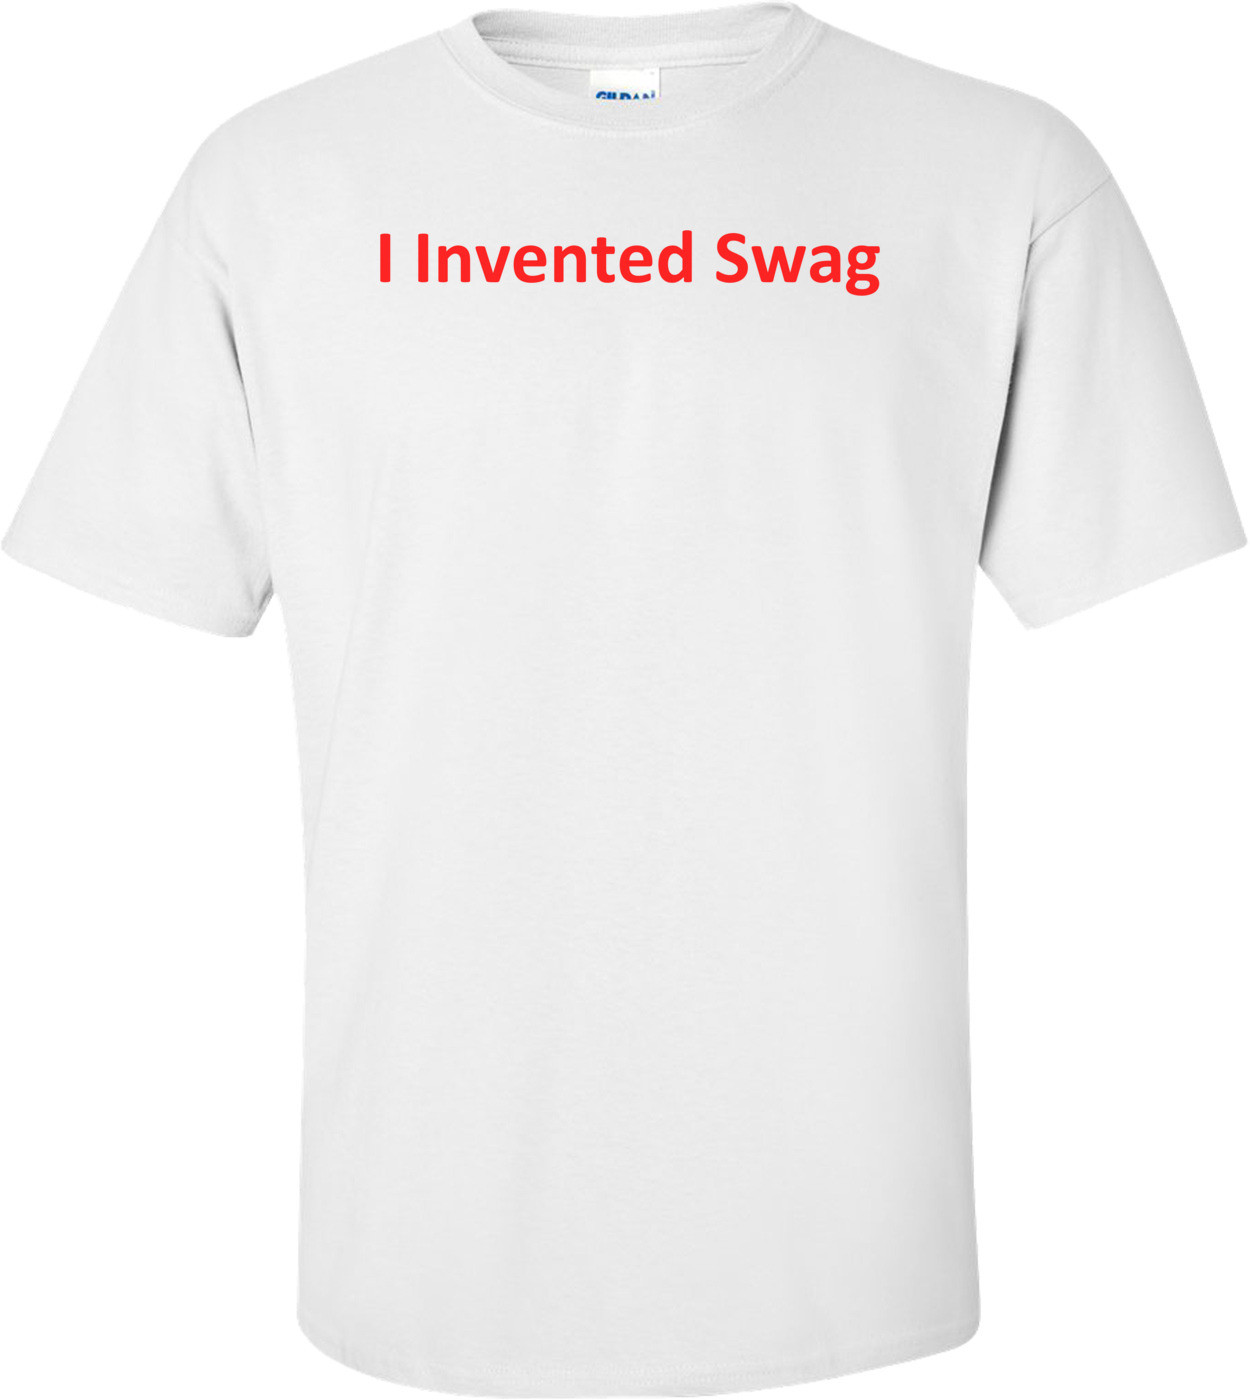 I Invented Swag